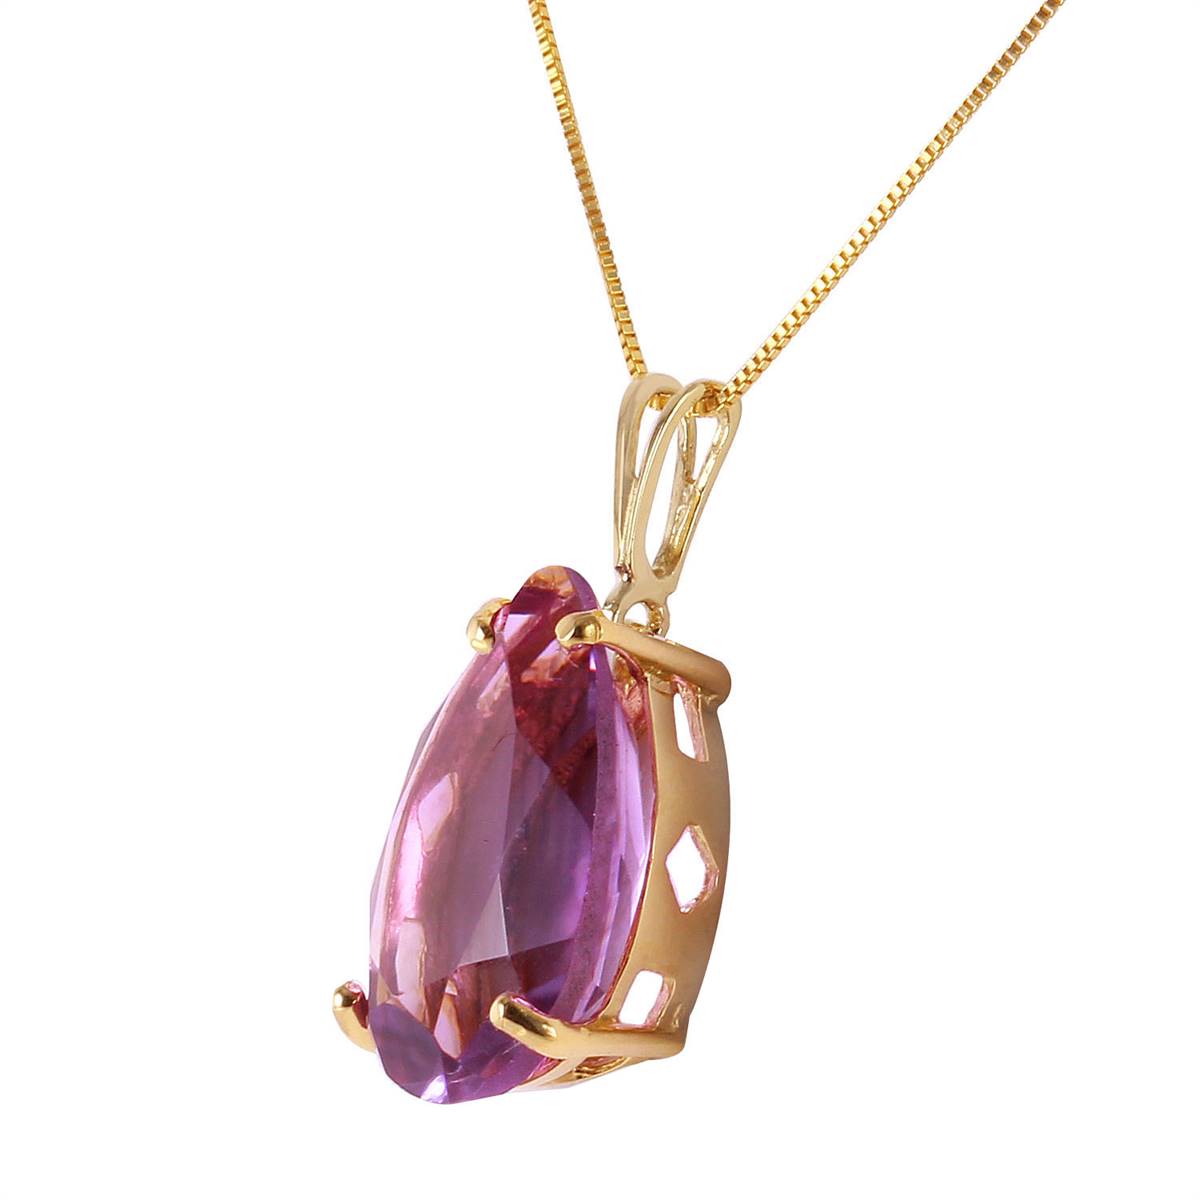 5 Carat 14K Solid Yellow Gold Reality Bites Amethyst Necklace